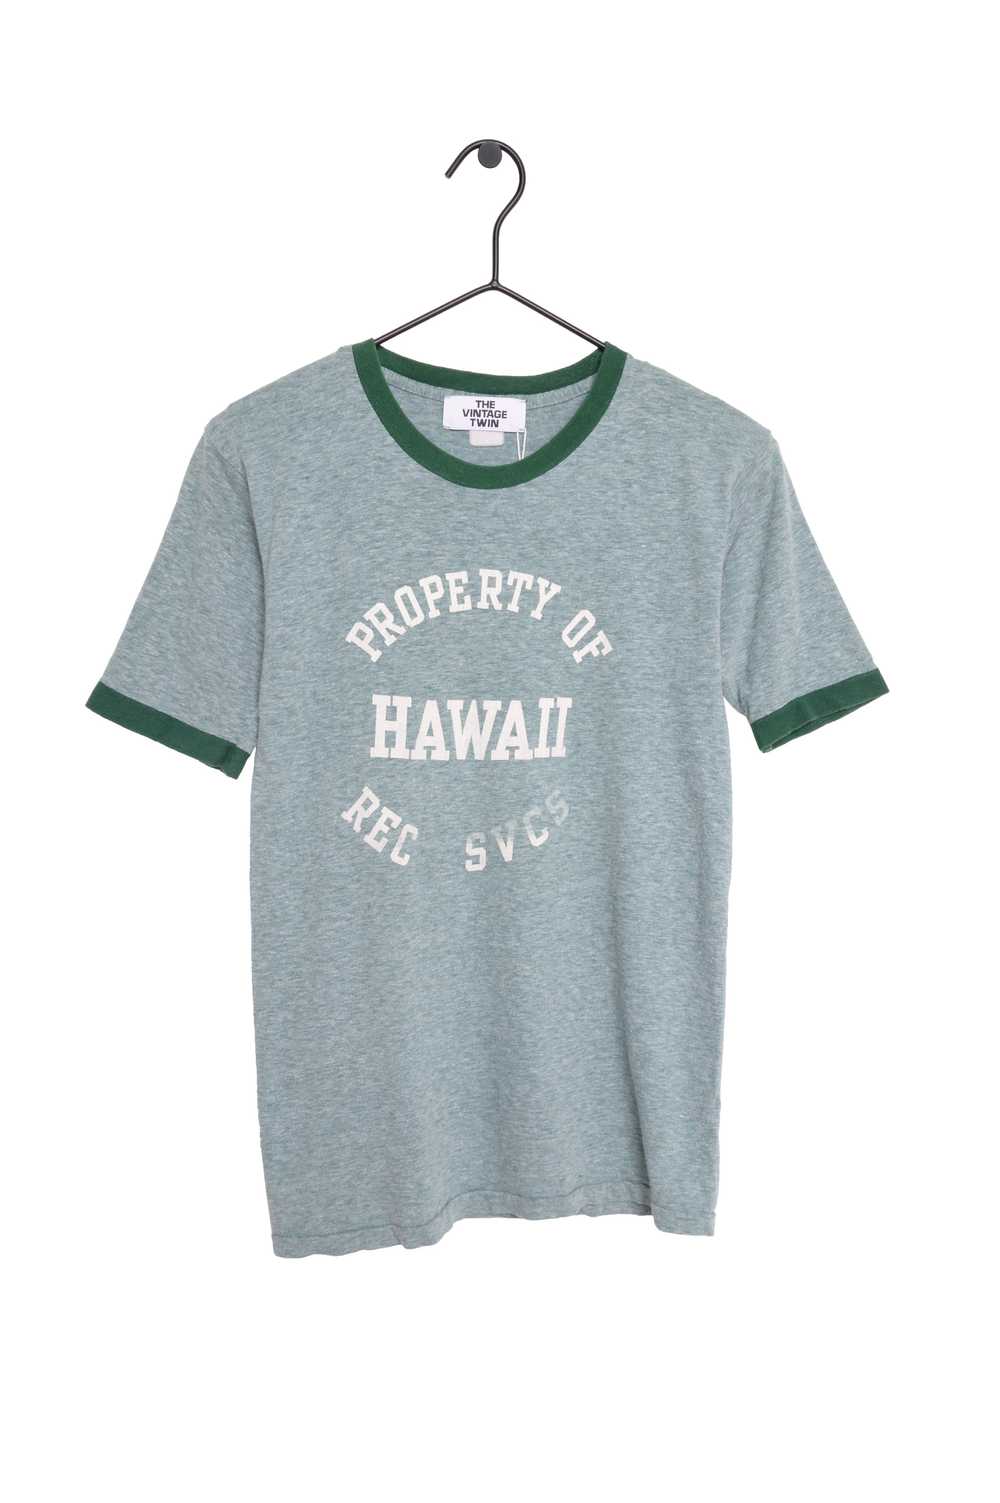 1980s Property of Hawaii Ringer Tee - image 1